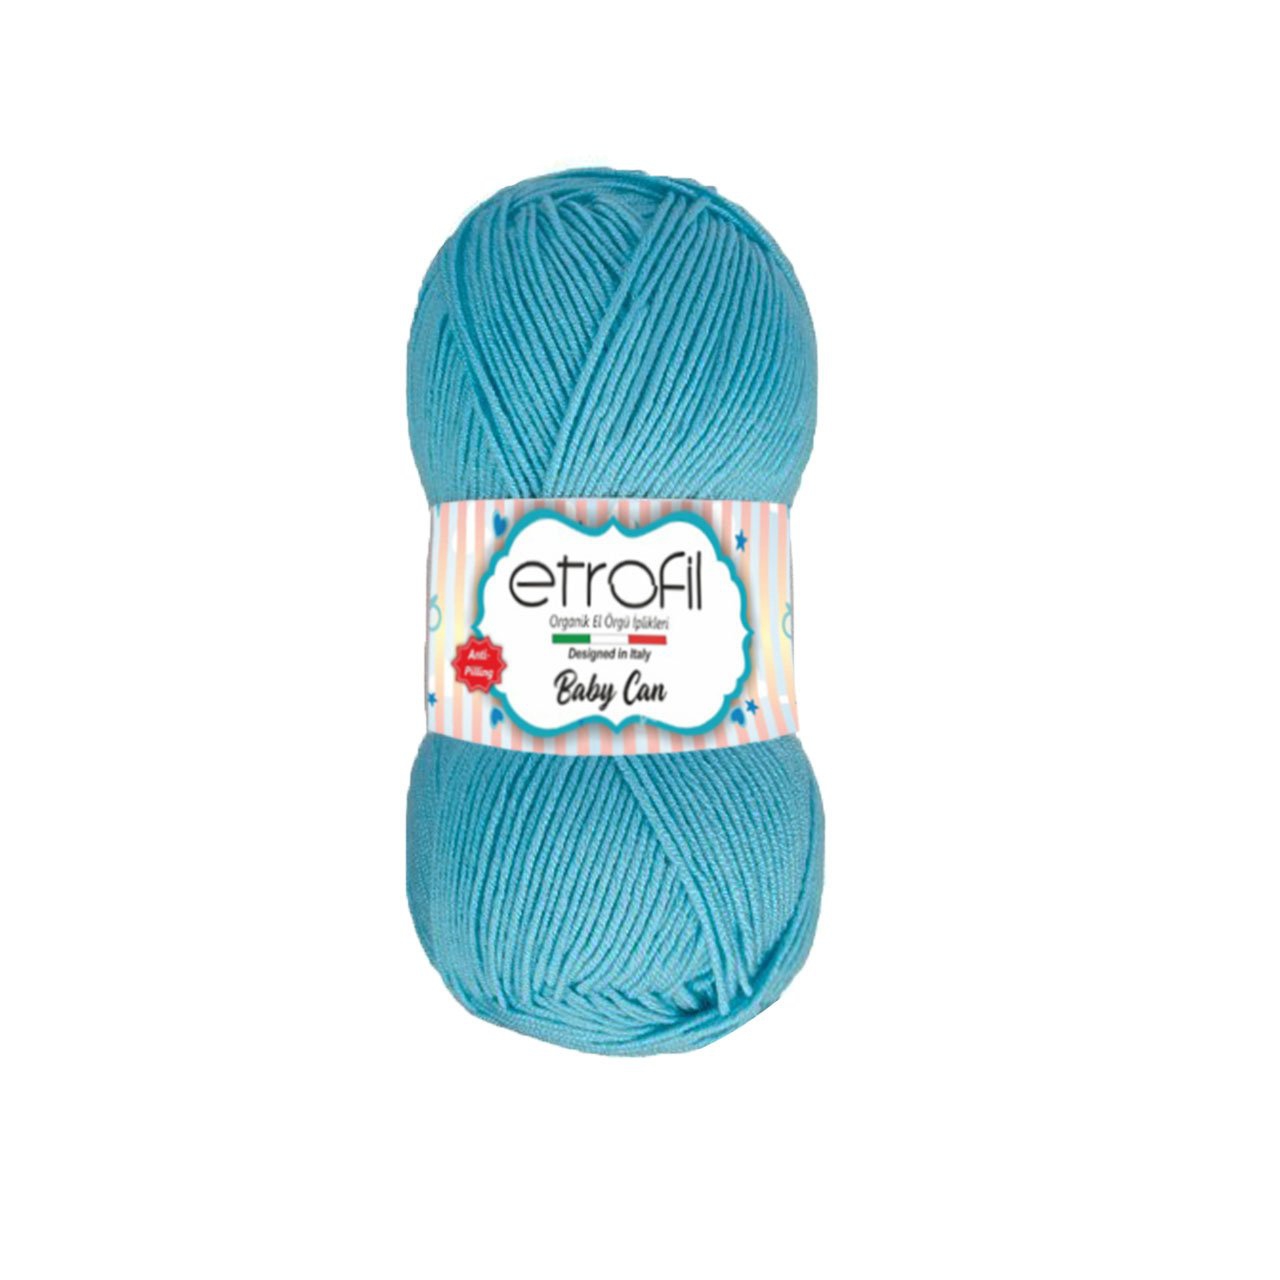 Etrofil Baby Can 80044